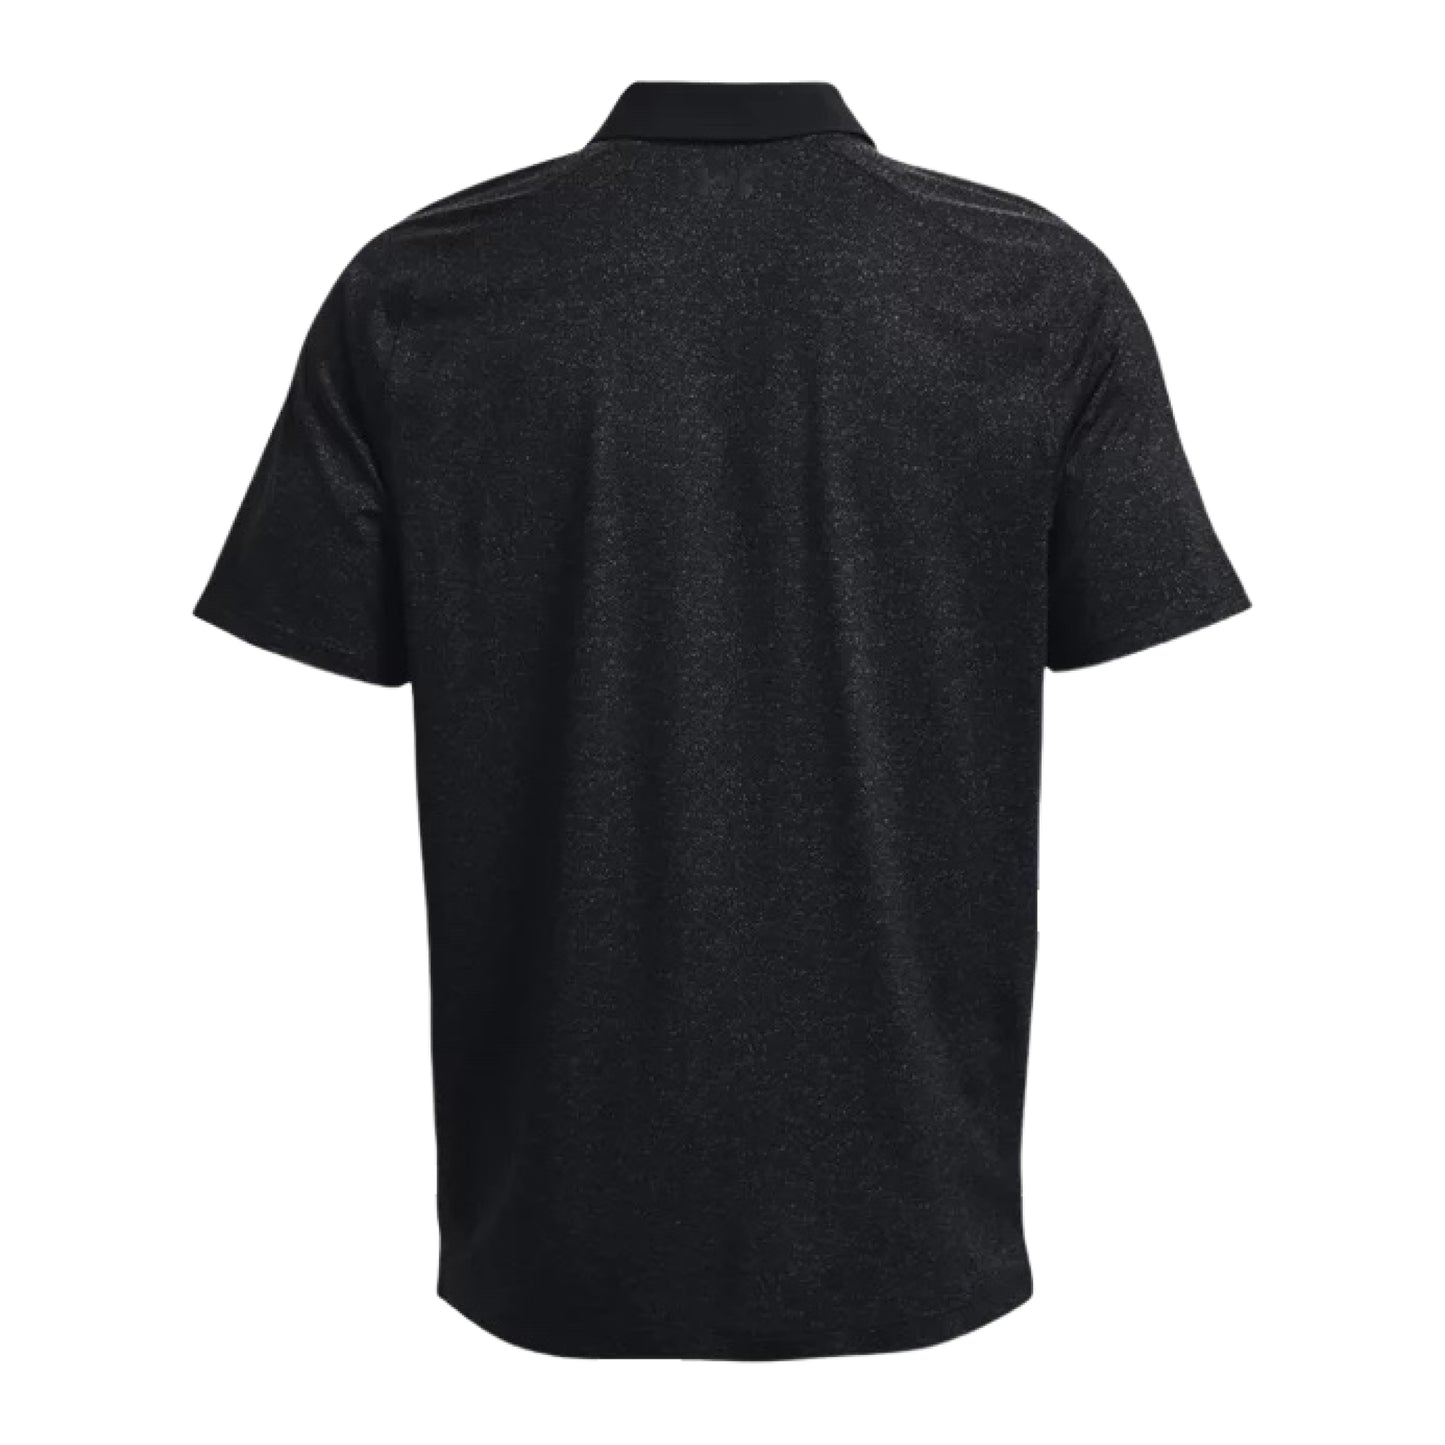 Under Armour ISO-Chill Heather Polo - Black